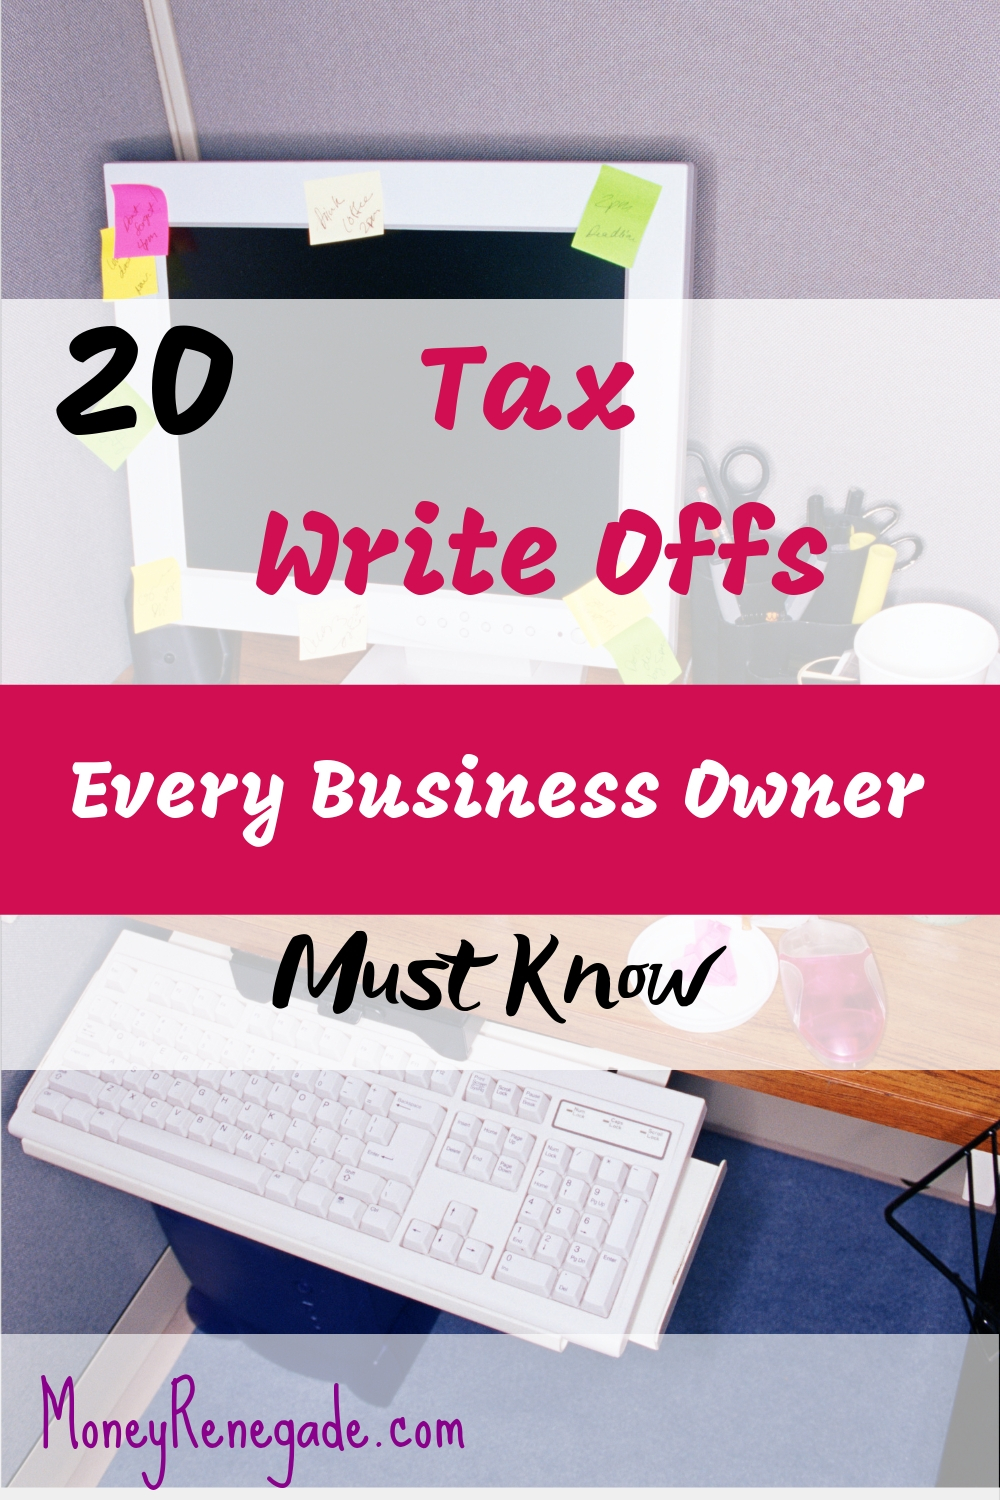 20 write offs for business owners